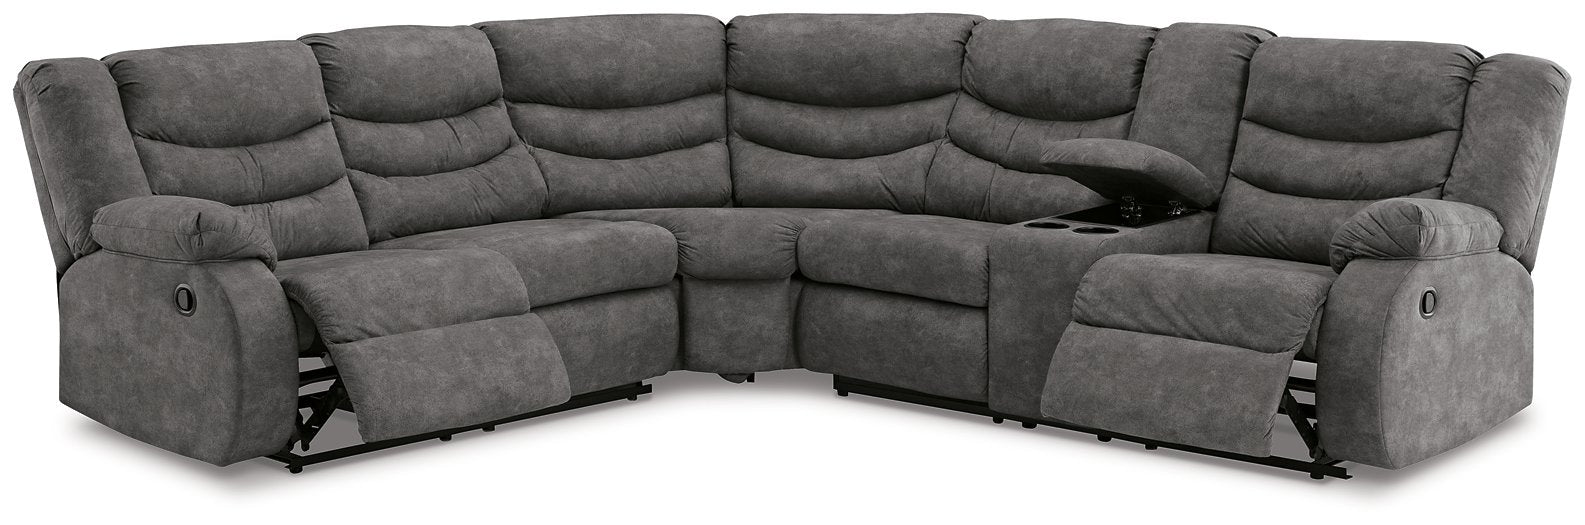 Partymate 2-Piece Reclining Sectional